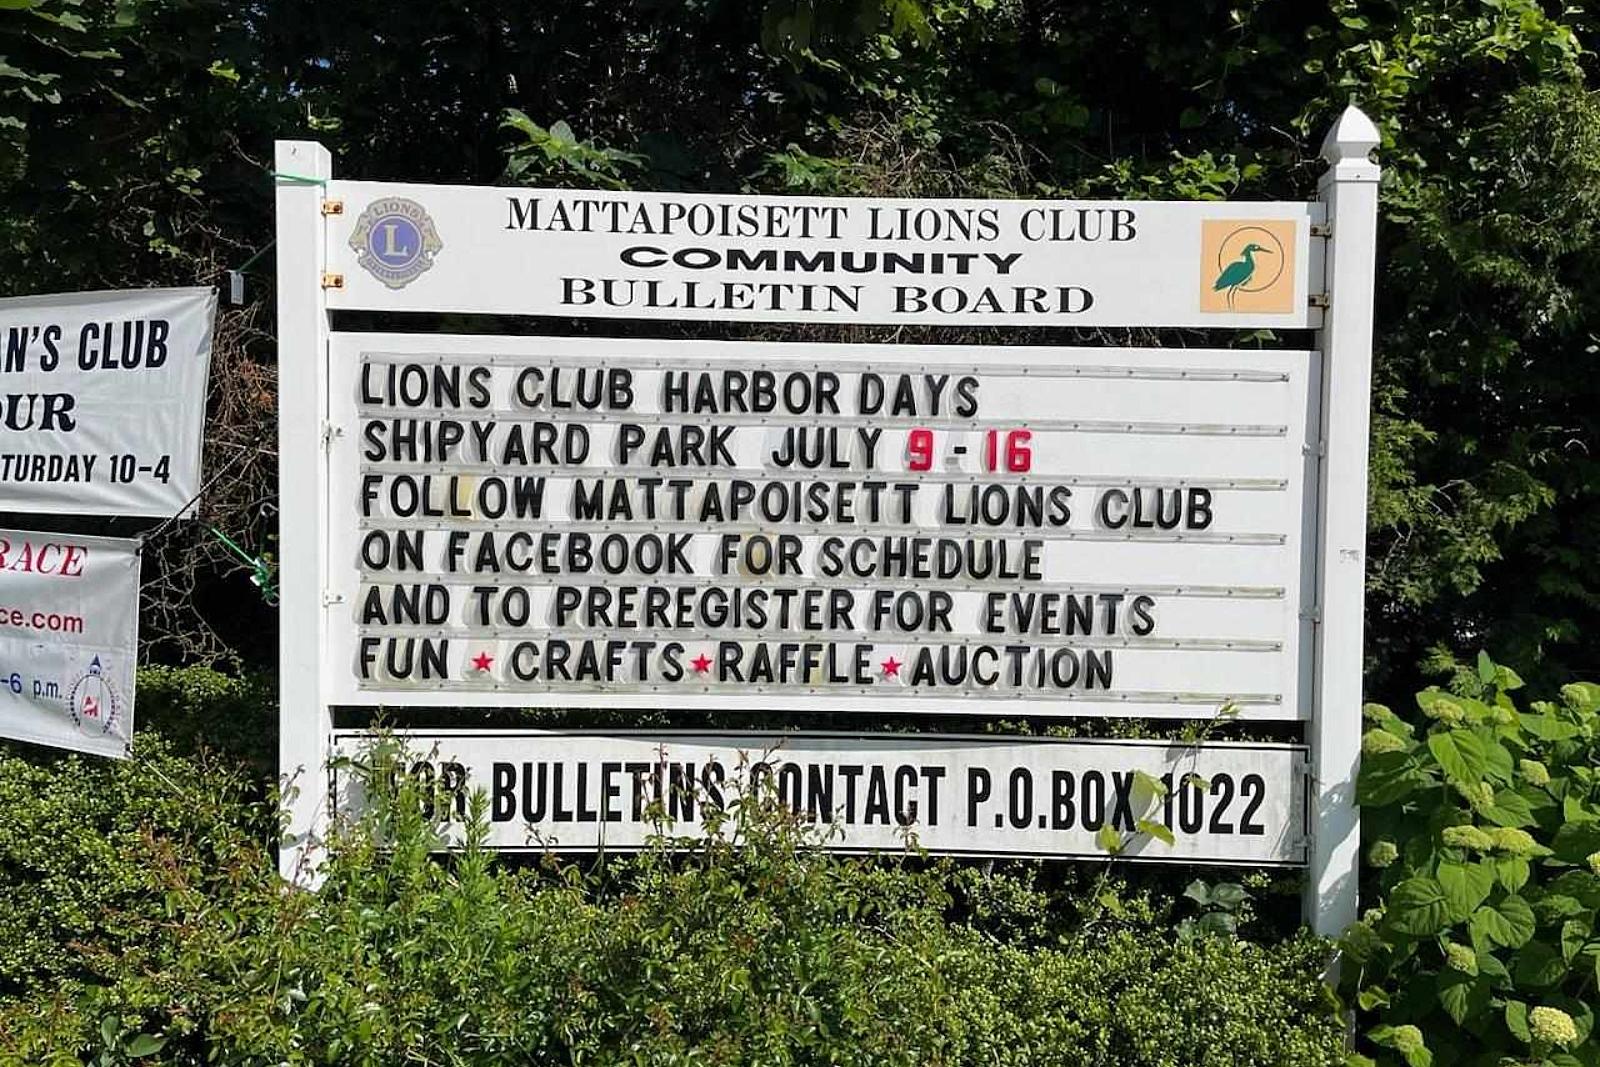 Mattapoisett Sign Destroyed in Crash Leads to Humorous Message